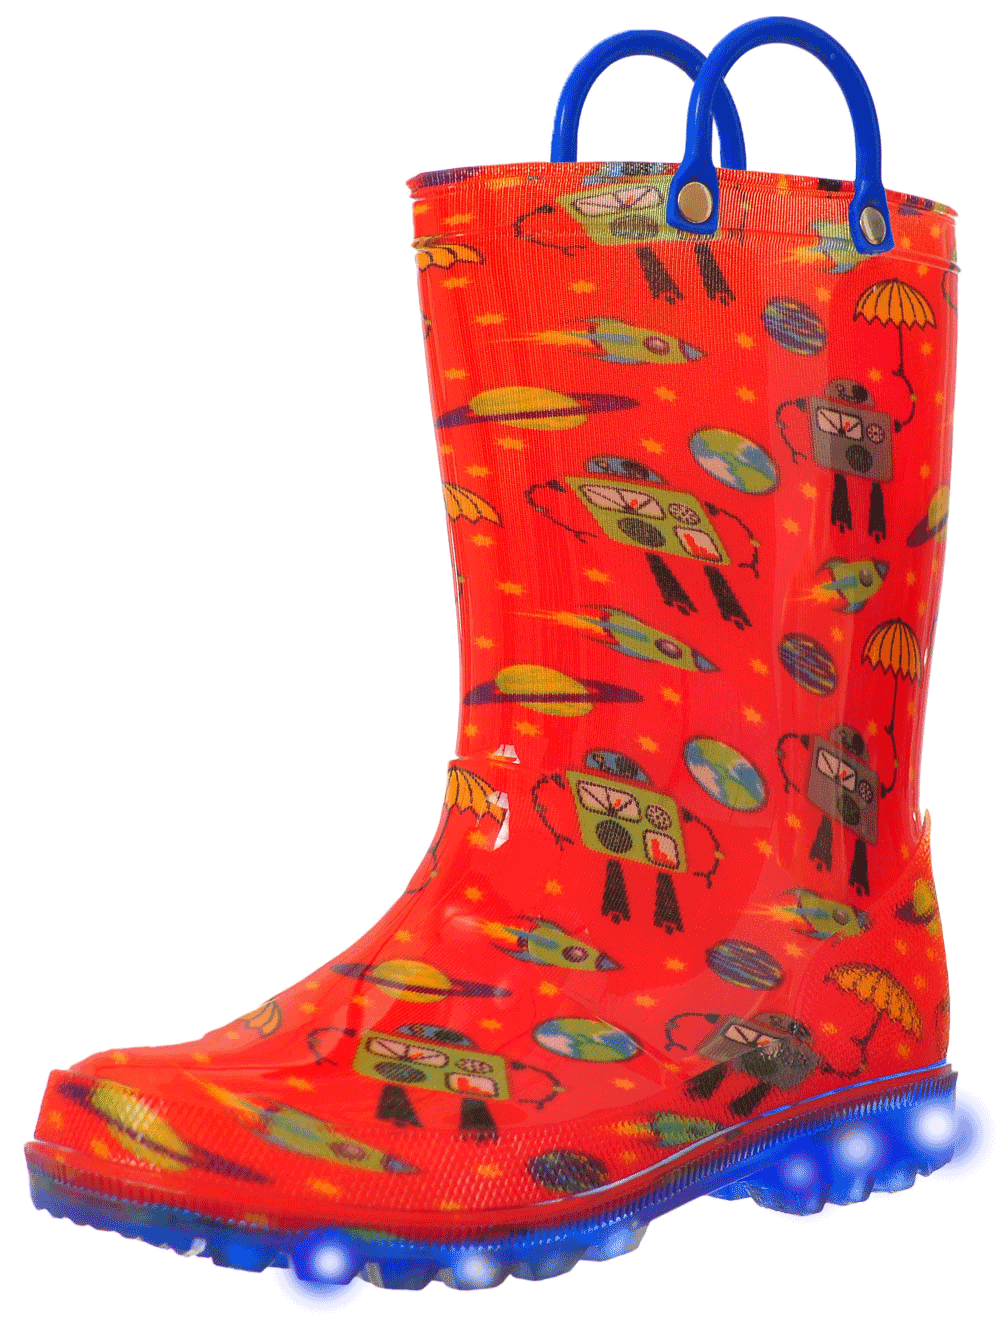 light up rubber boots for toddlers